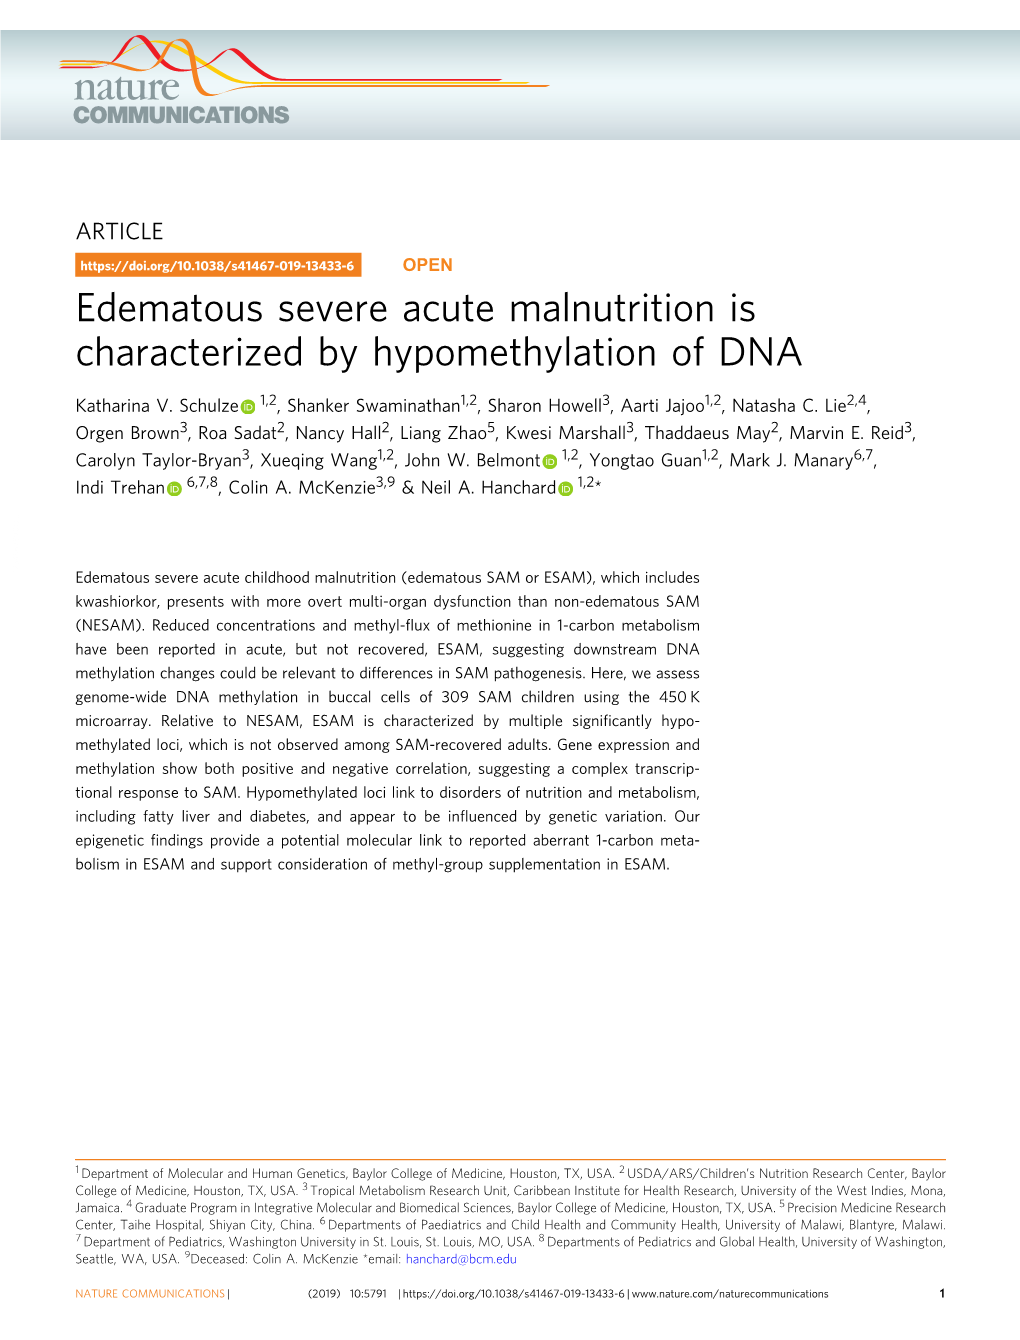 Edematous Severe Acute Malnutrition Is Characterized by Hypomethylation of DNA